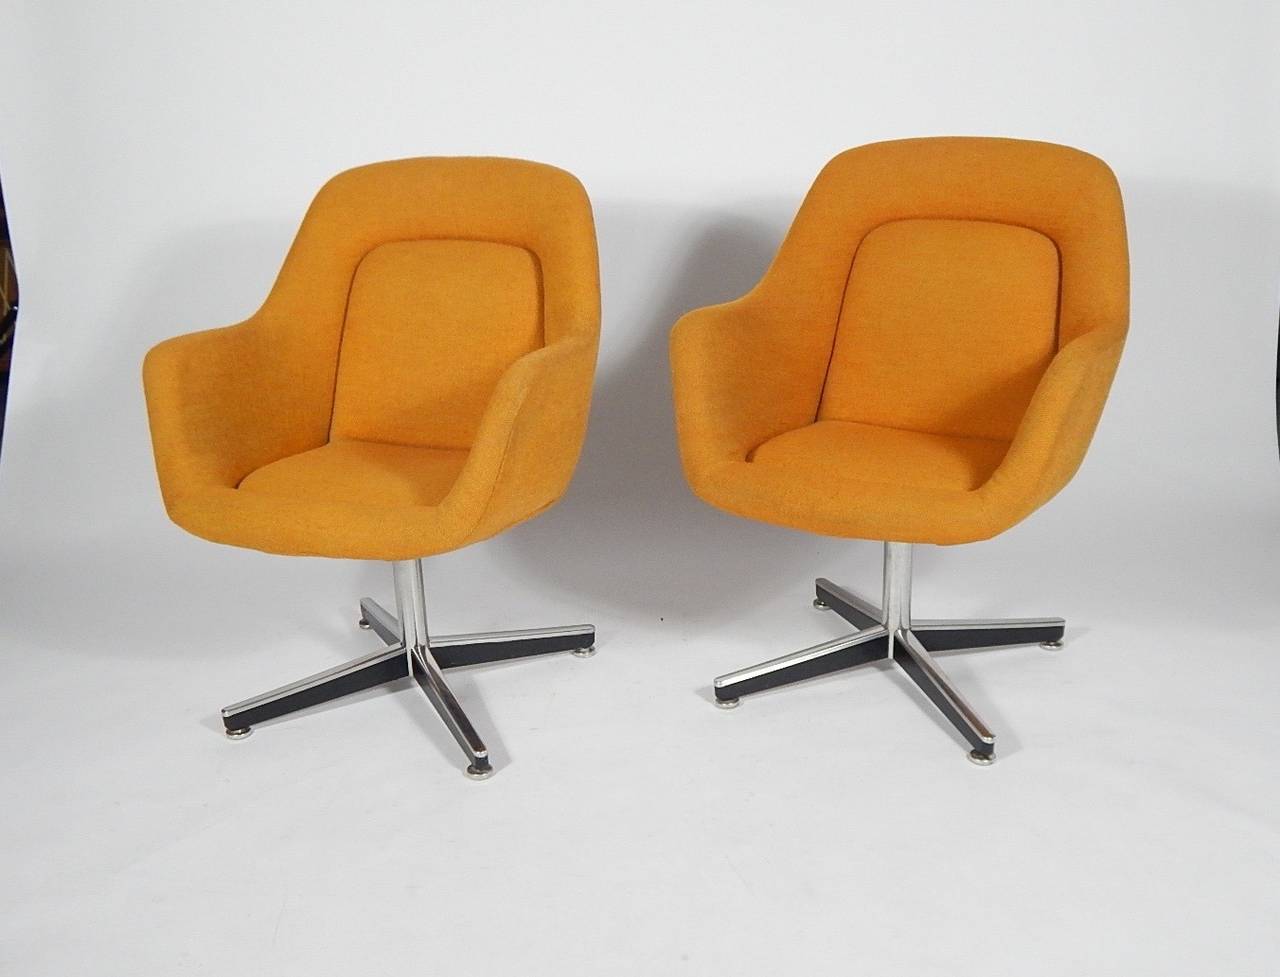 A great example of the executive chair by Max Pearson for Knoll with original orange upholstery, latex foam rubber seat cushion, stainless steel CAP base (fixed), timeless. Paper labels, 